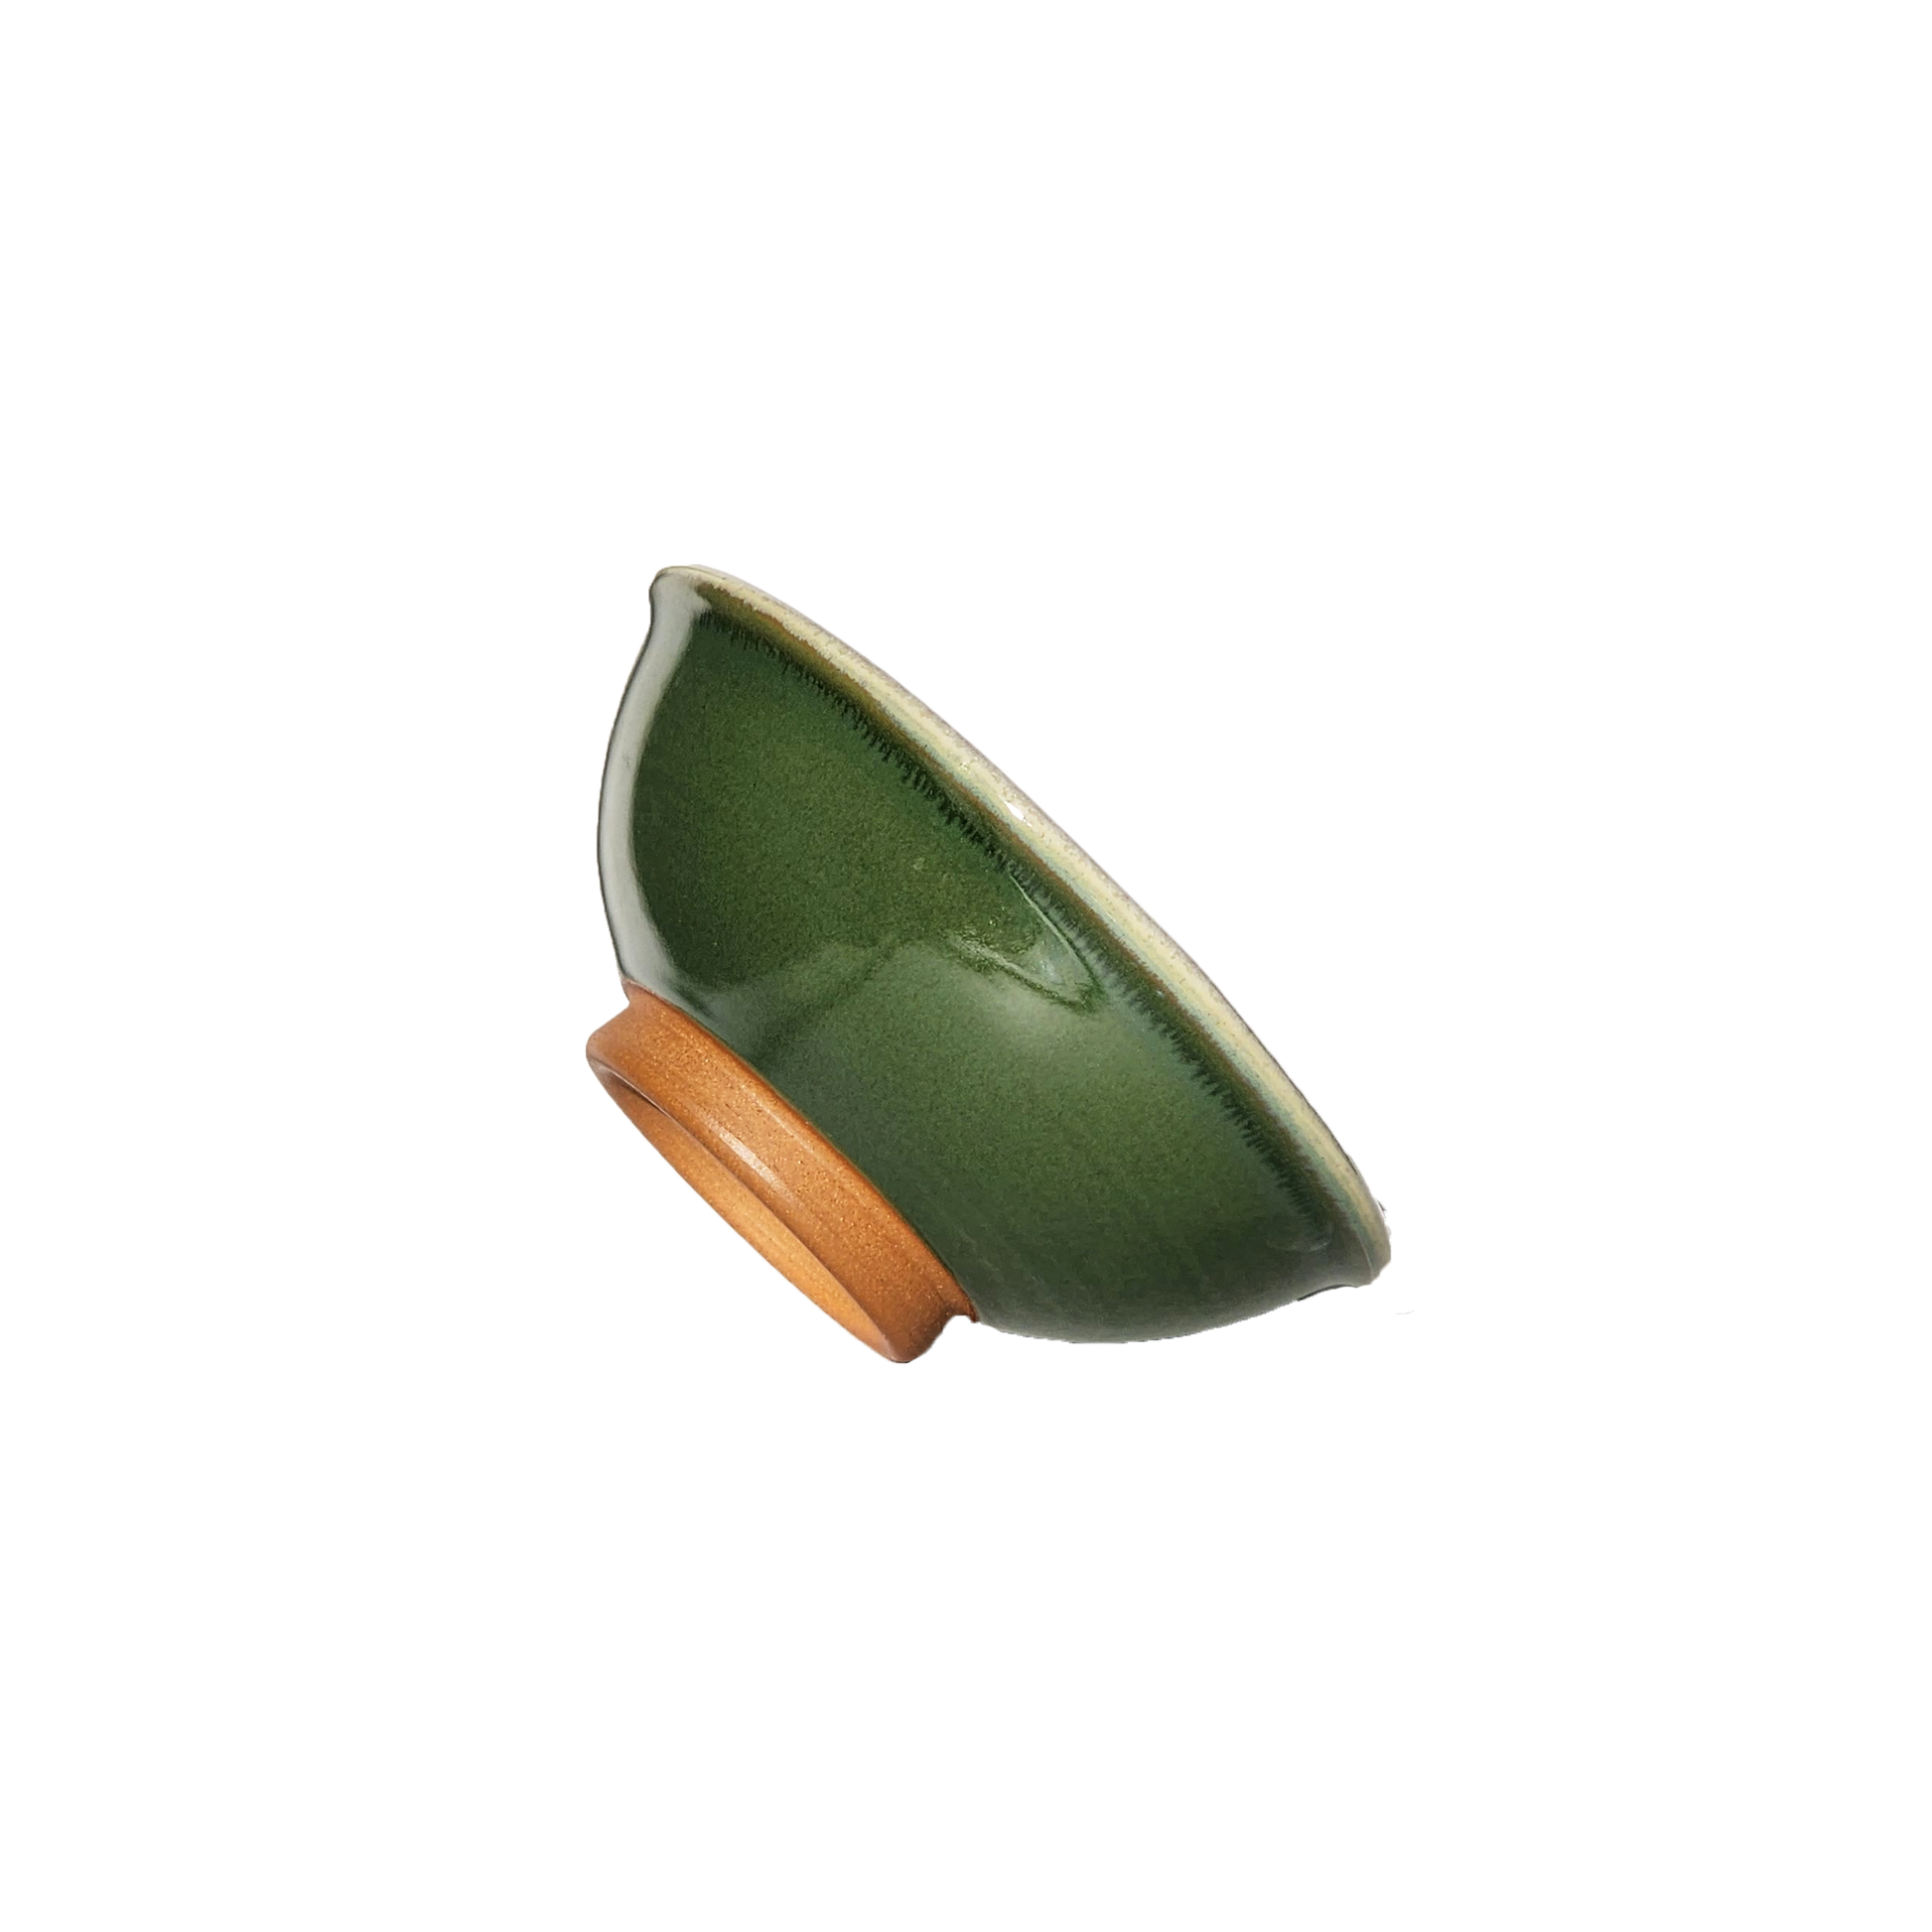 Image: A small mixing bowl in a rich dark green shade, offering a capacity of 2.25 cups. Perfect for ingredients, snacks, or condiments, this bowl brings a touch of elegance and nature-inspired charm to your kitchen.